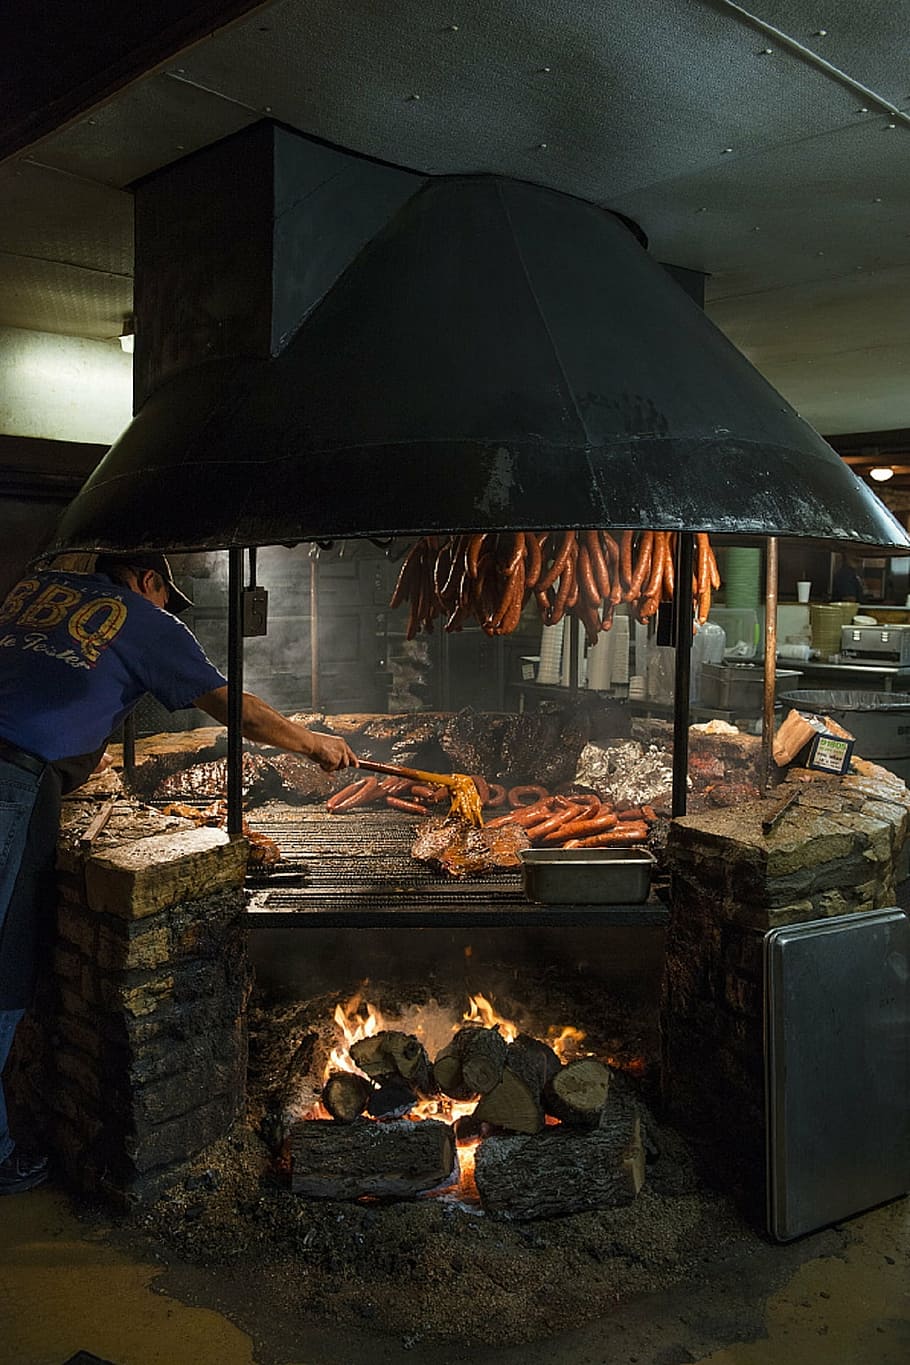 barbecue, pit, smoke, meat, fire, wood, glowing, food, bbq, texas